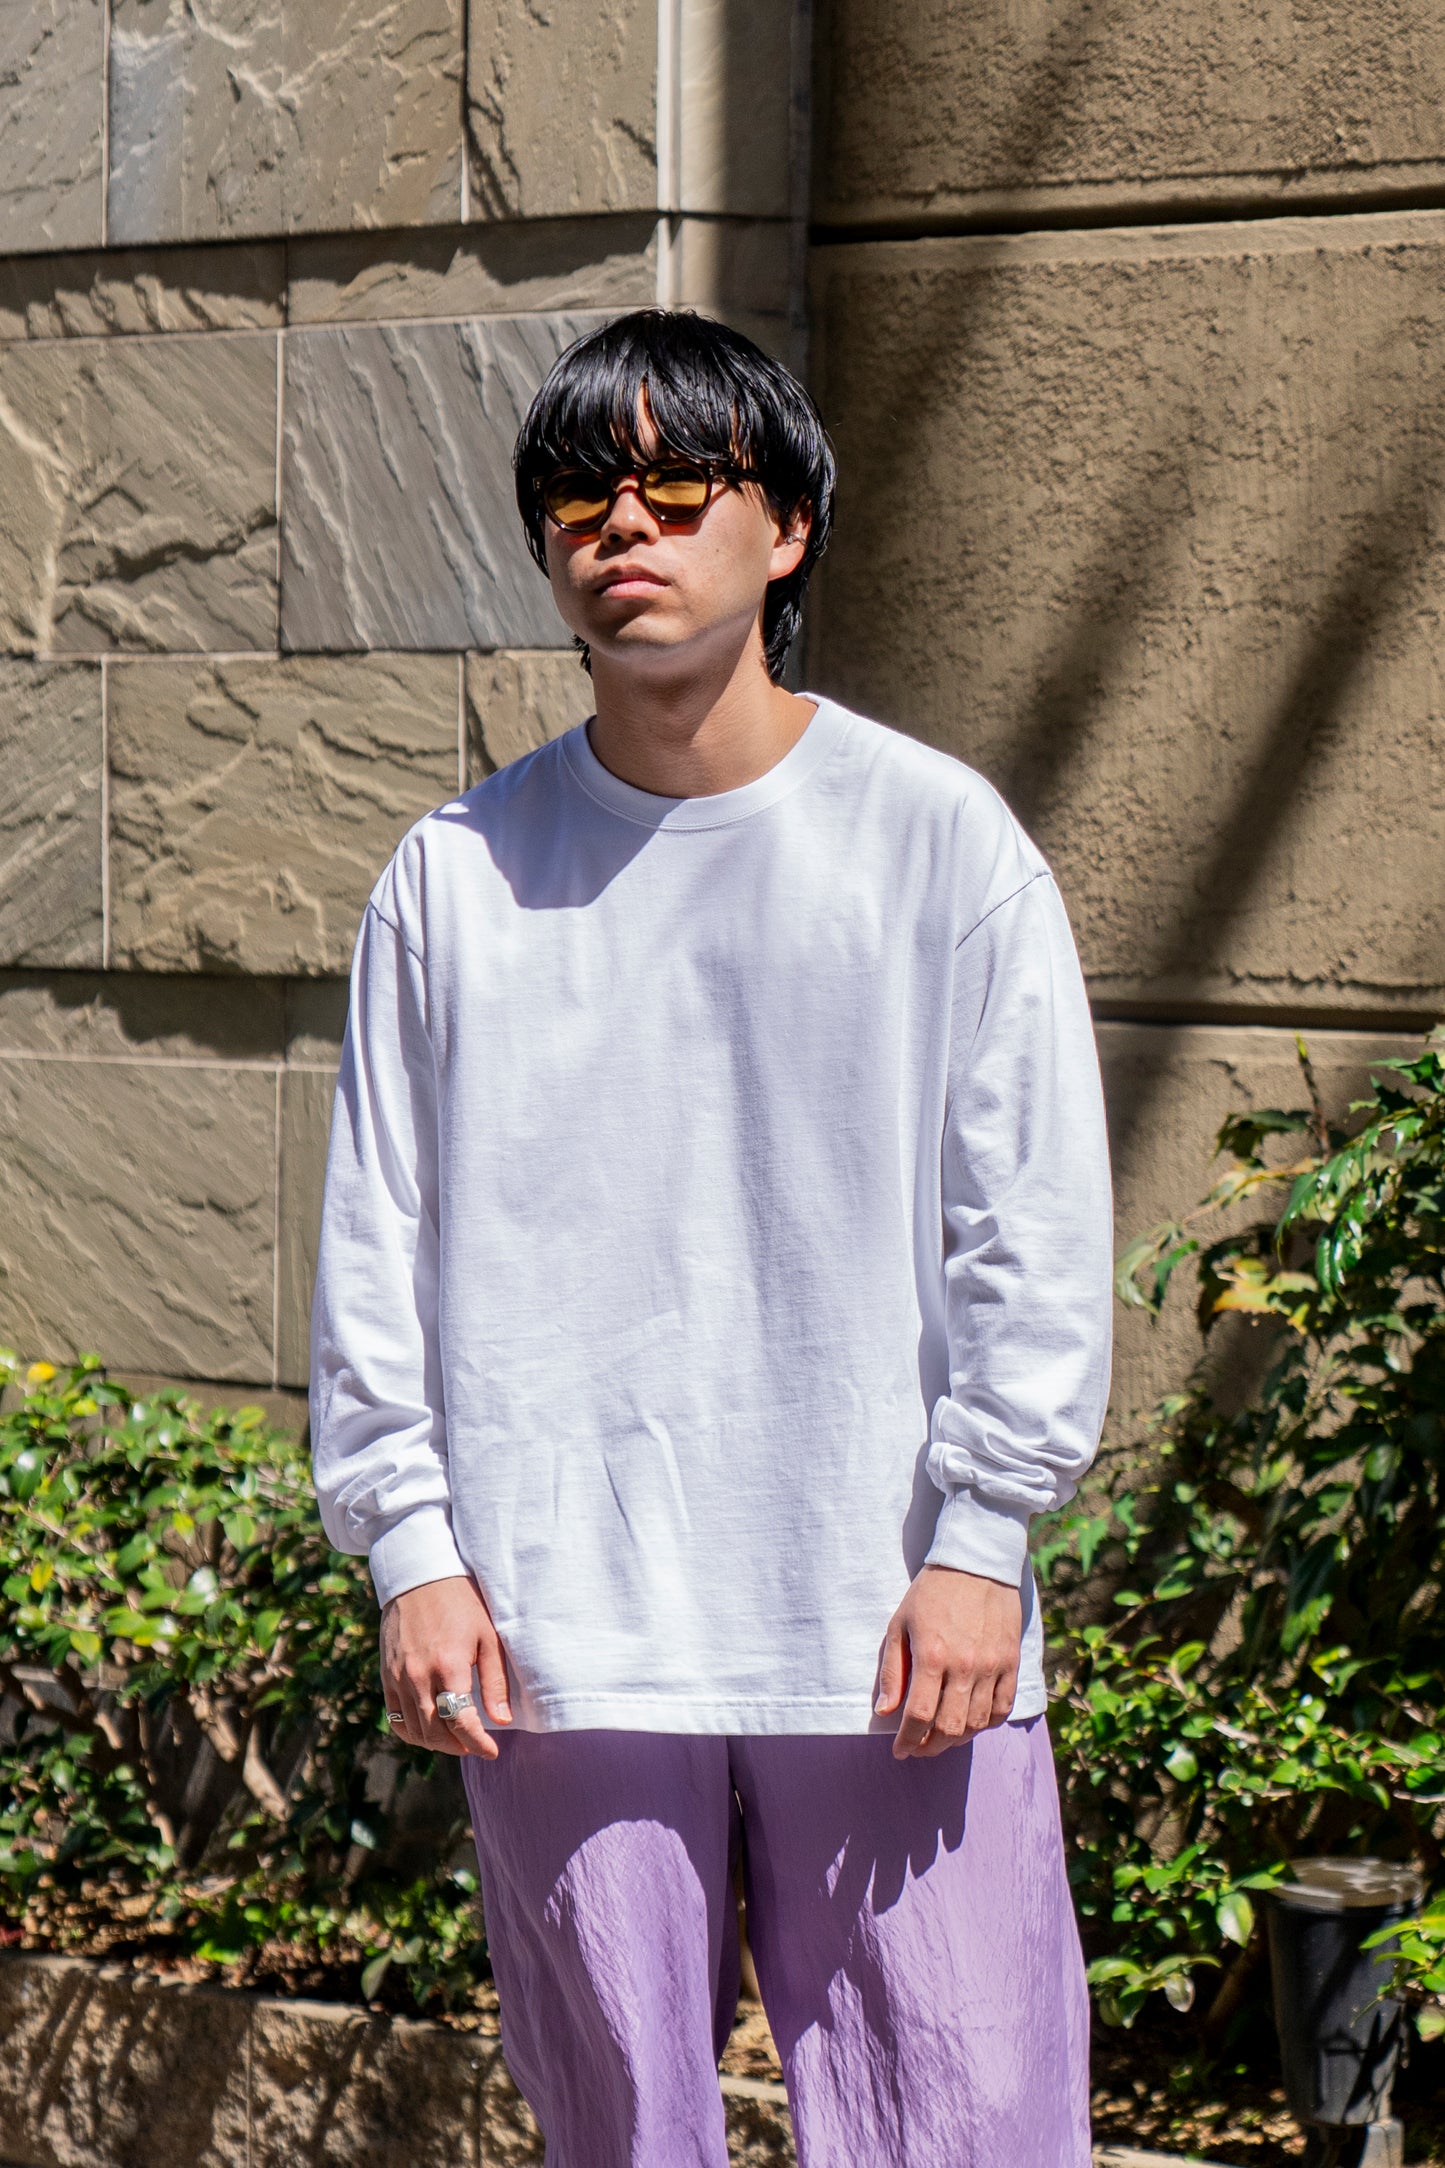 MIDDLEWEGHIT COTTON CASHMERE LONG SLEEVE TEE